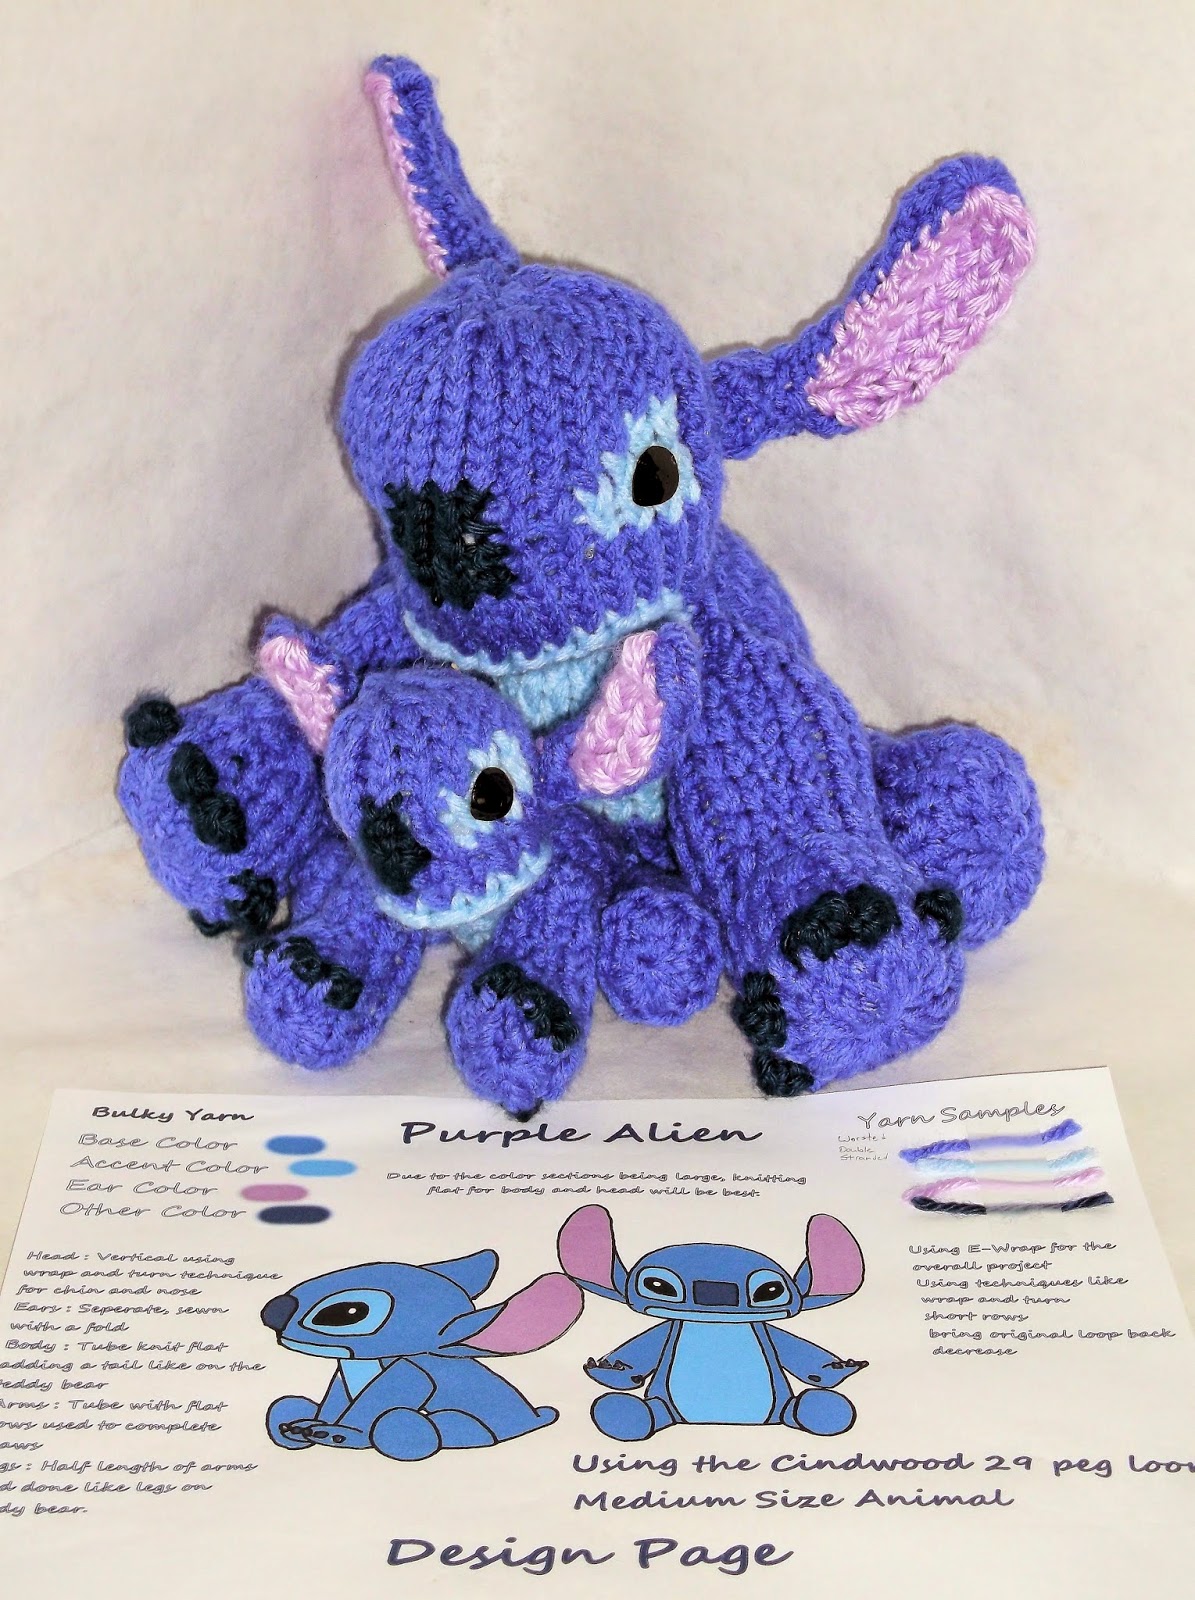 The Loom Muse : Designing a Stuffed Animal Pattern From Beginning to End  Loom Knitting